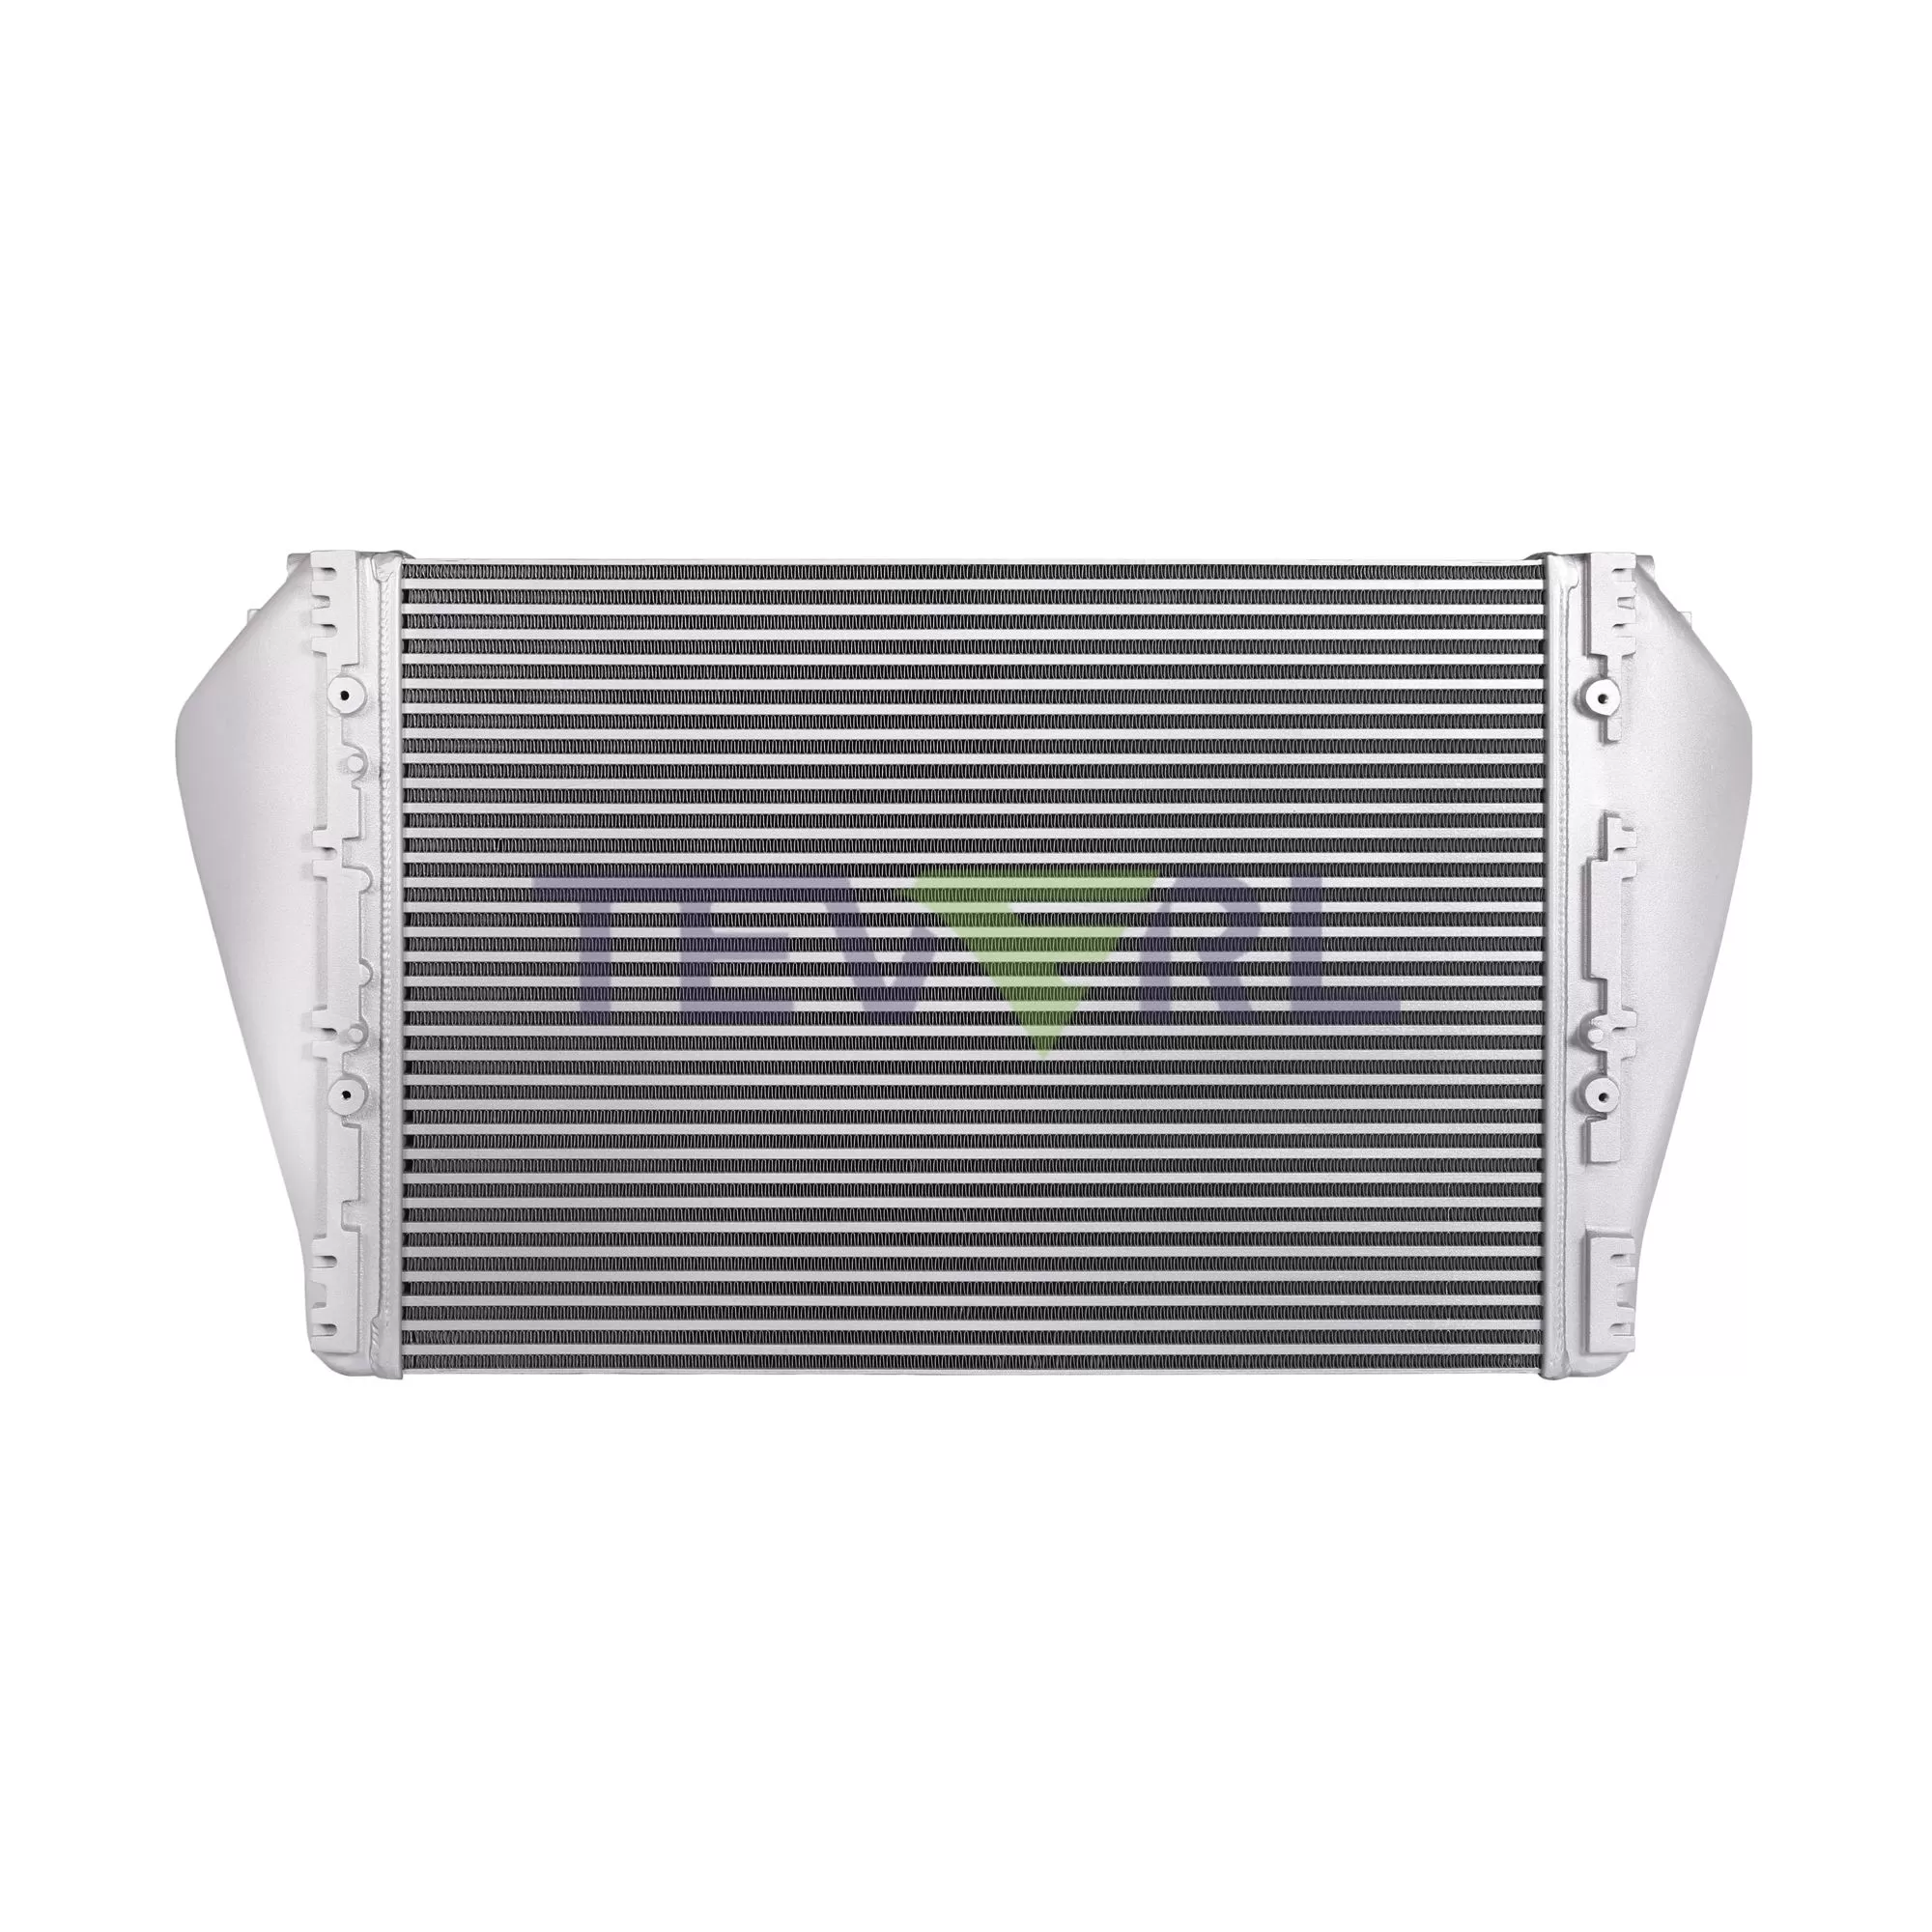 10502008 Volvo Mack Charge Air Cooler